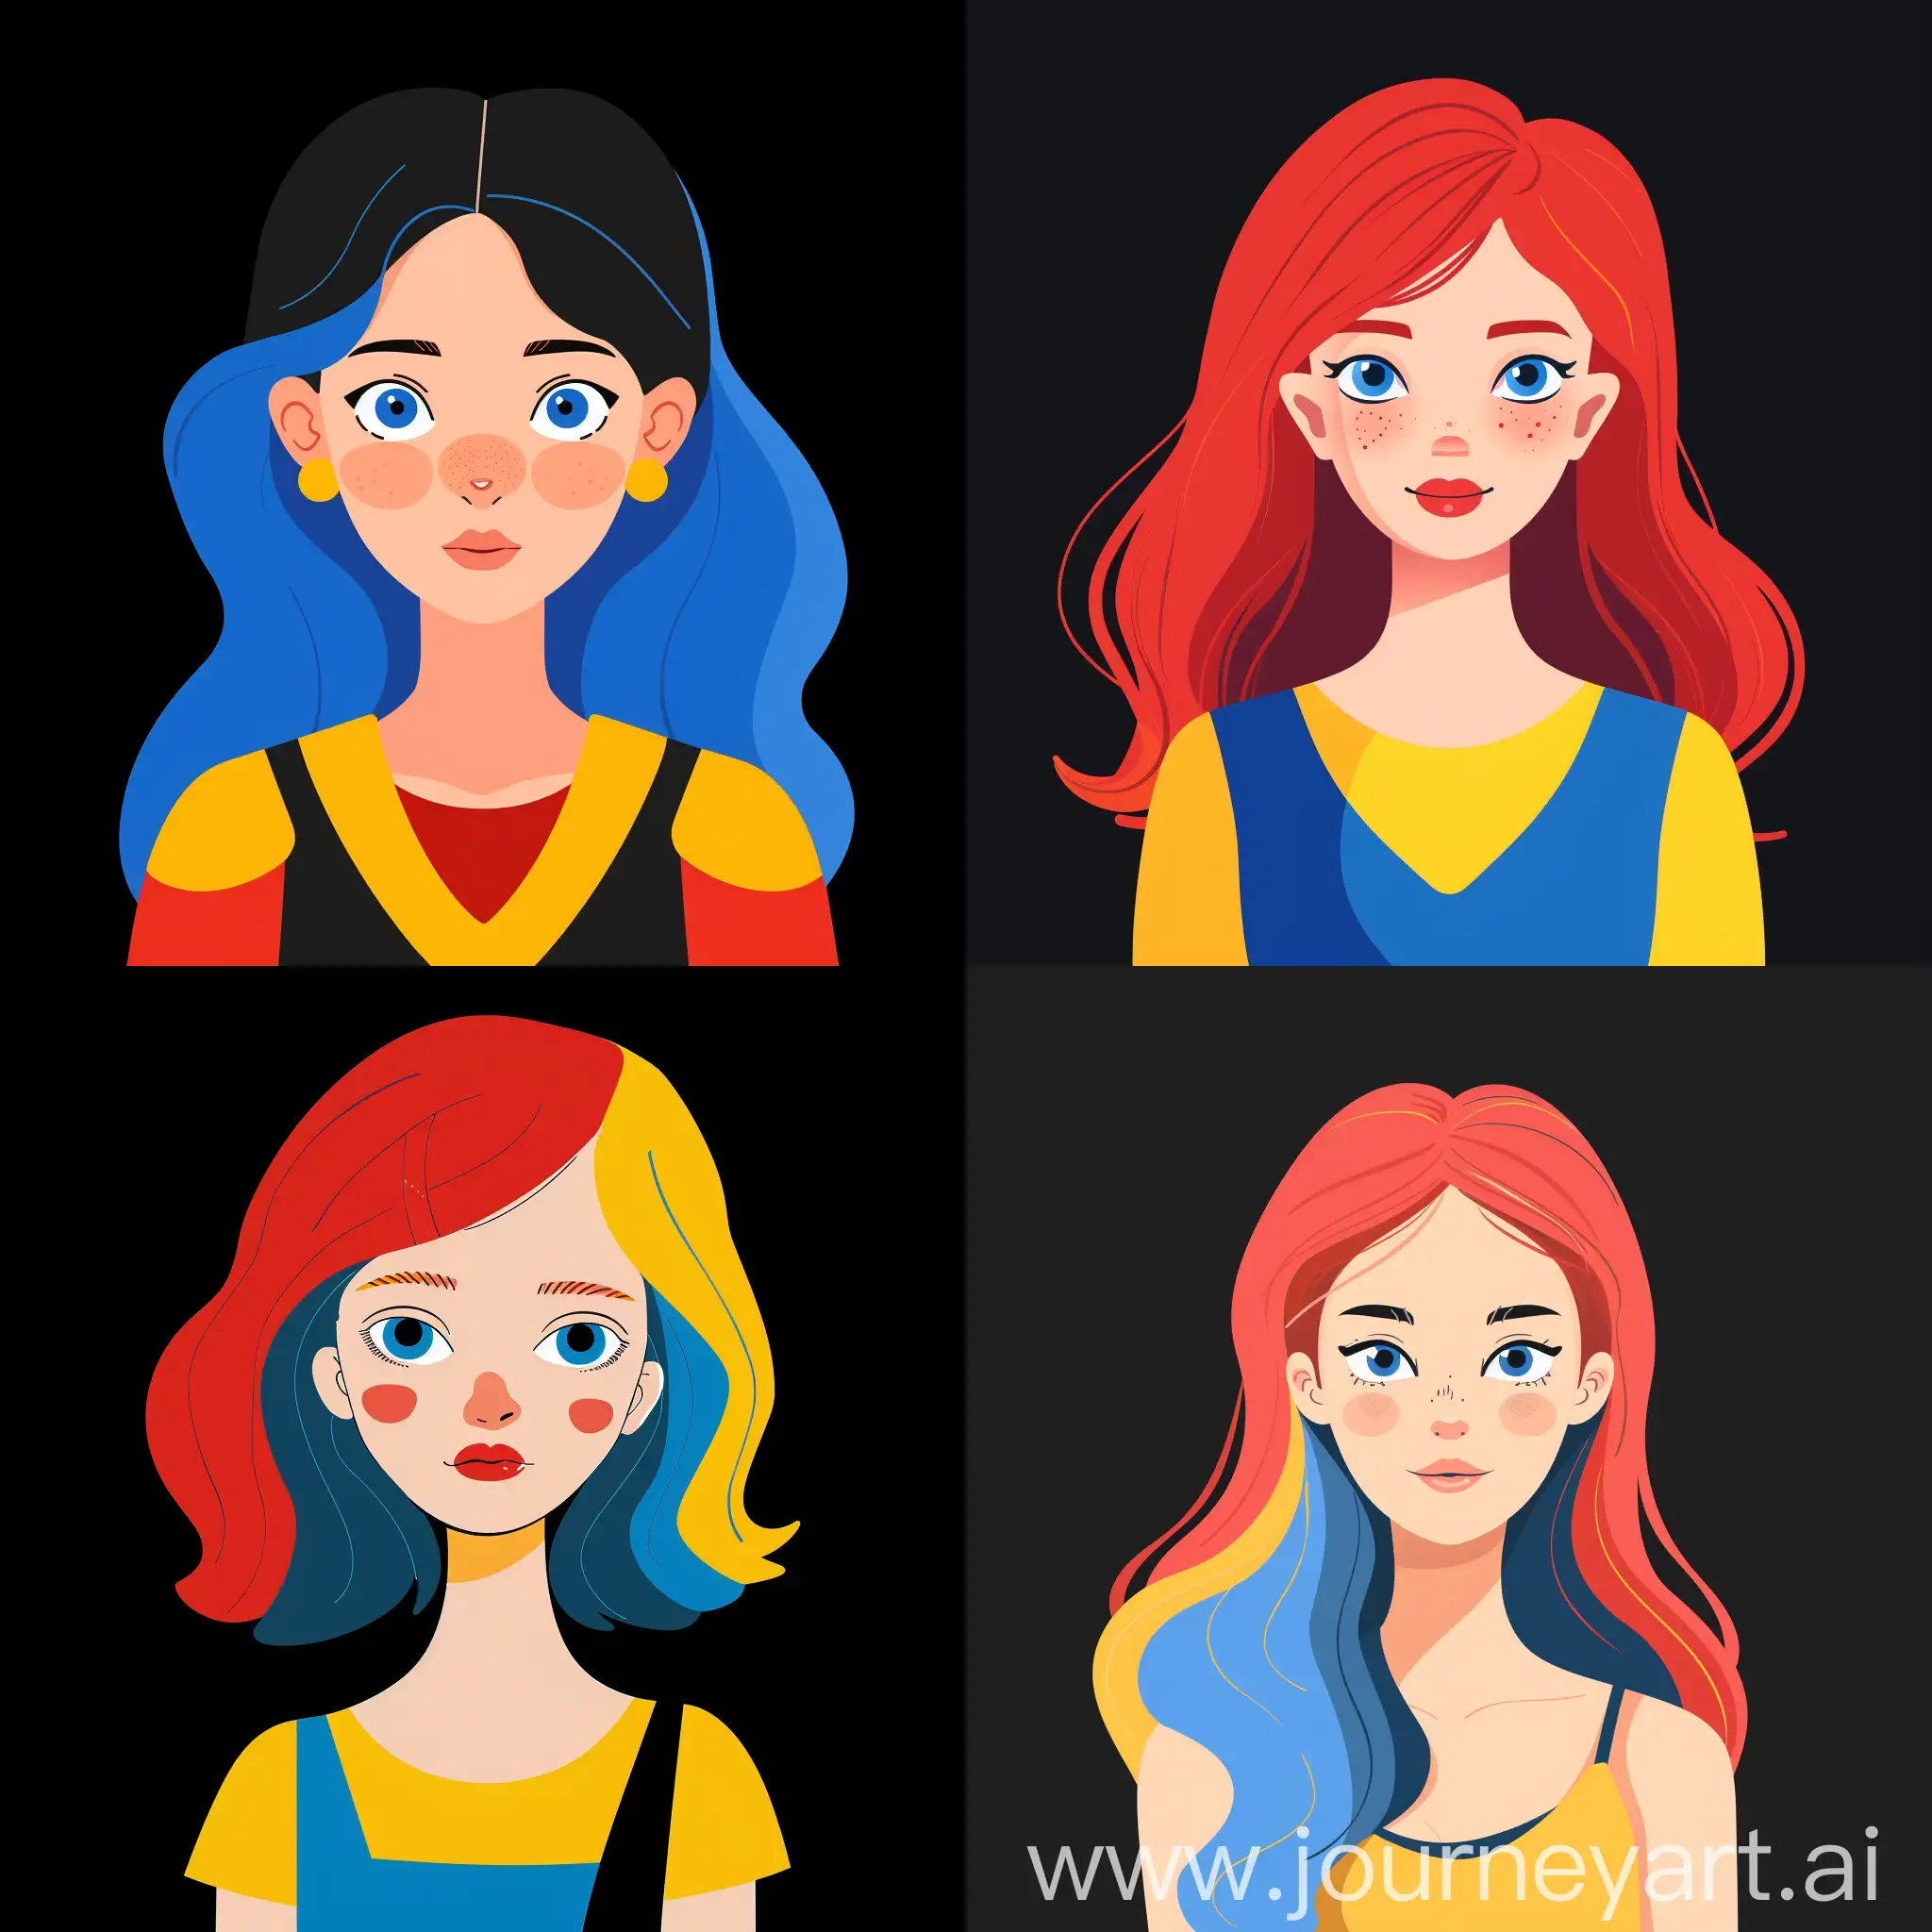 vibrant [red, blue, yellow][young woman], cartoon cute, beautiful colors, contrast with black background, in high quality flat style